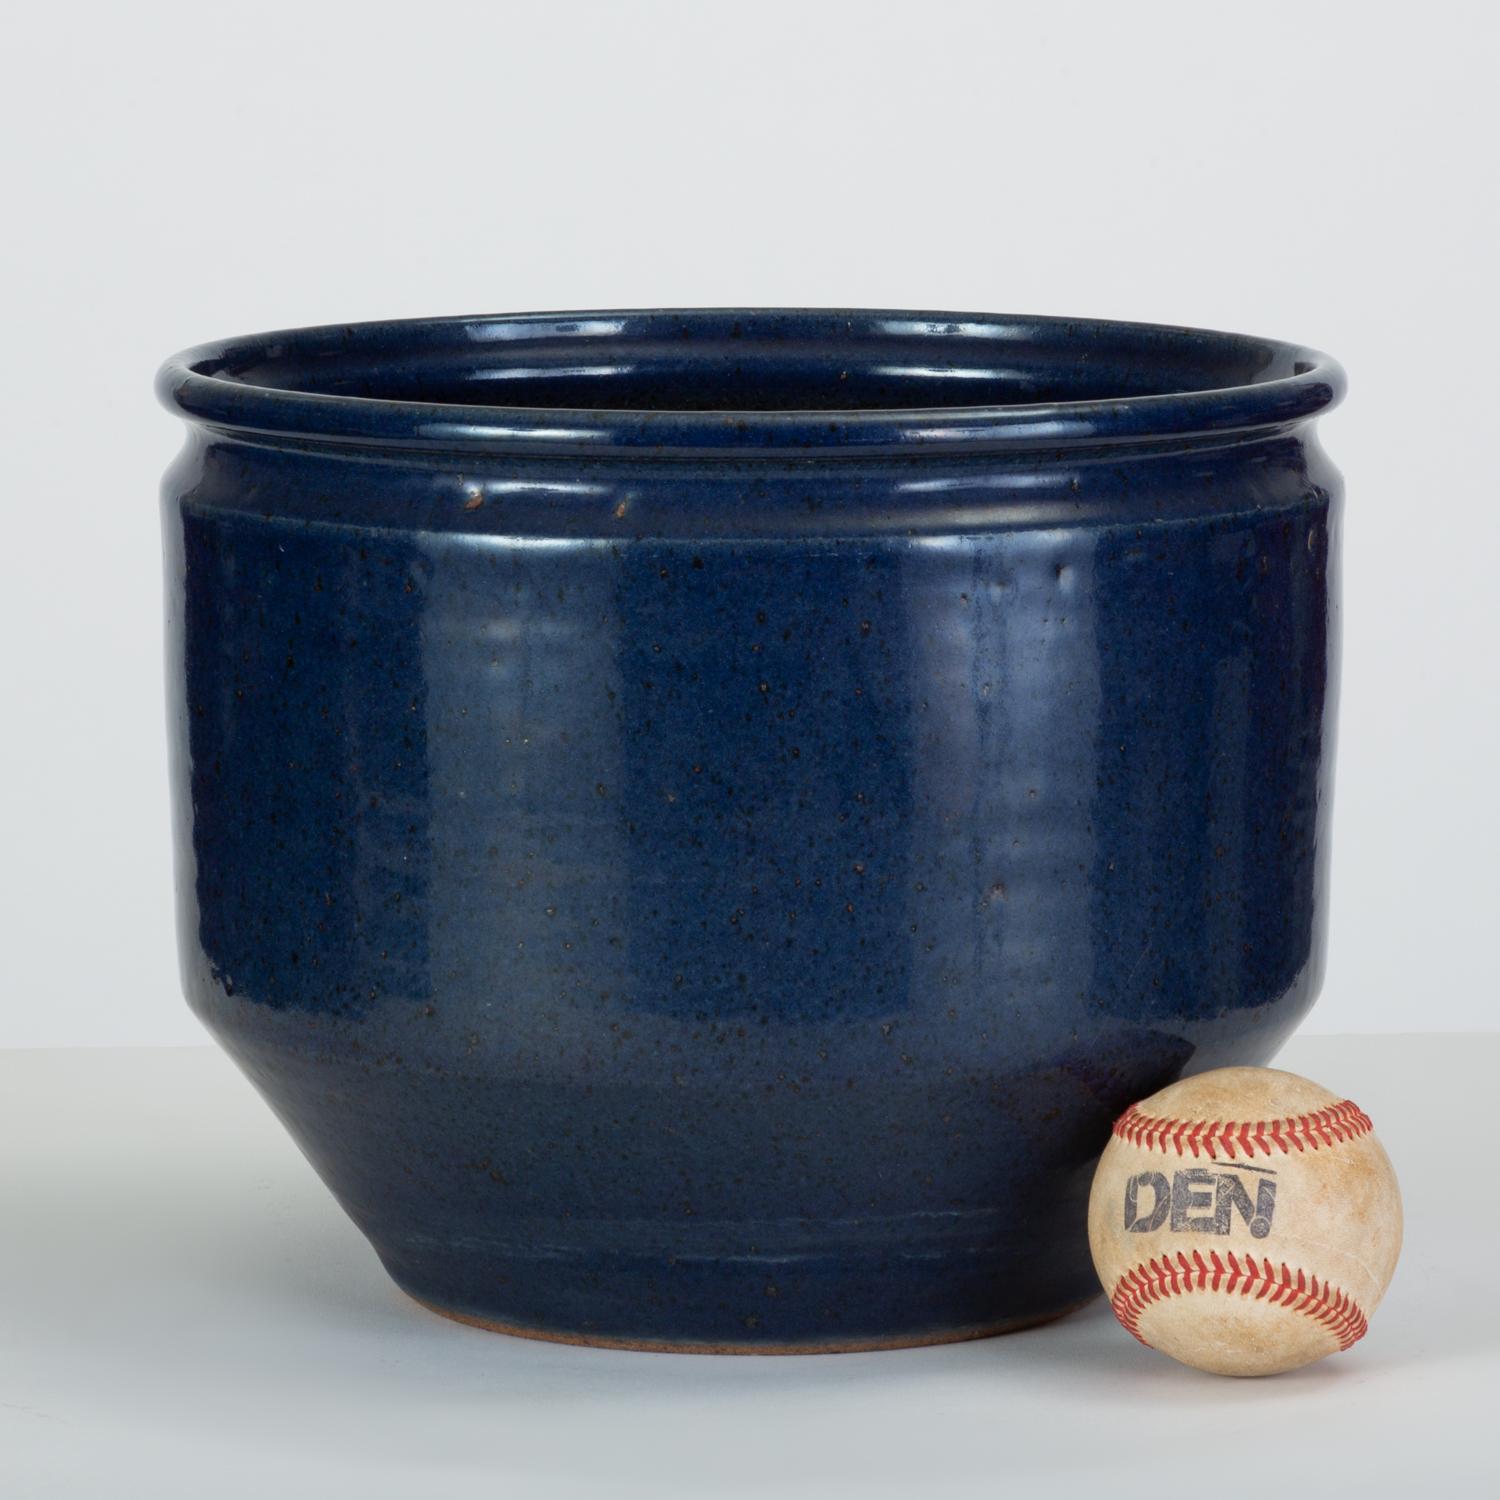 Pair of Blue-Glazed Earthgender Bowl Planters, David Cressey and Robert Maxwell 4